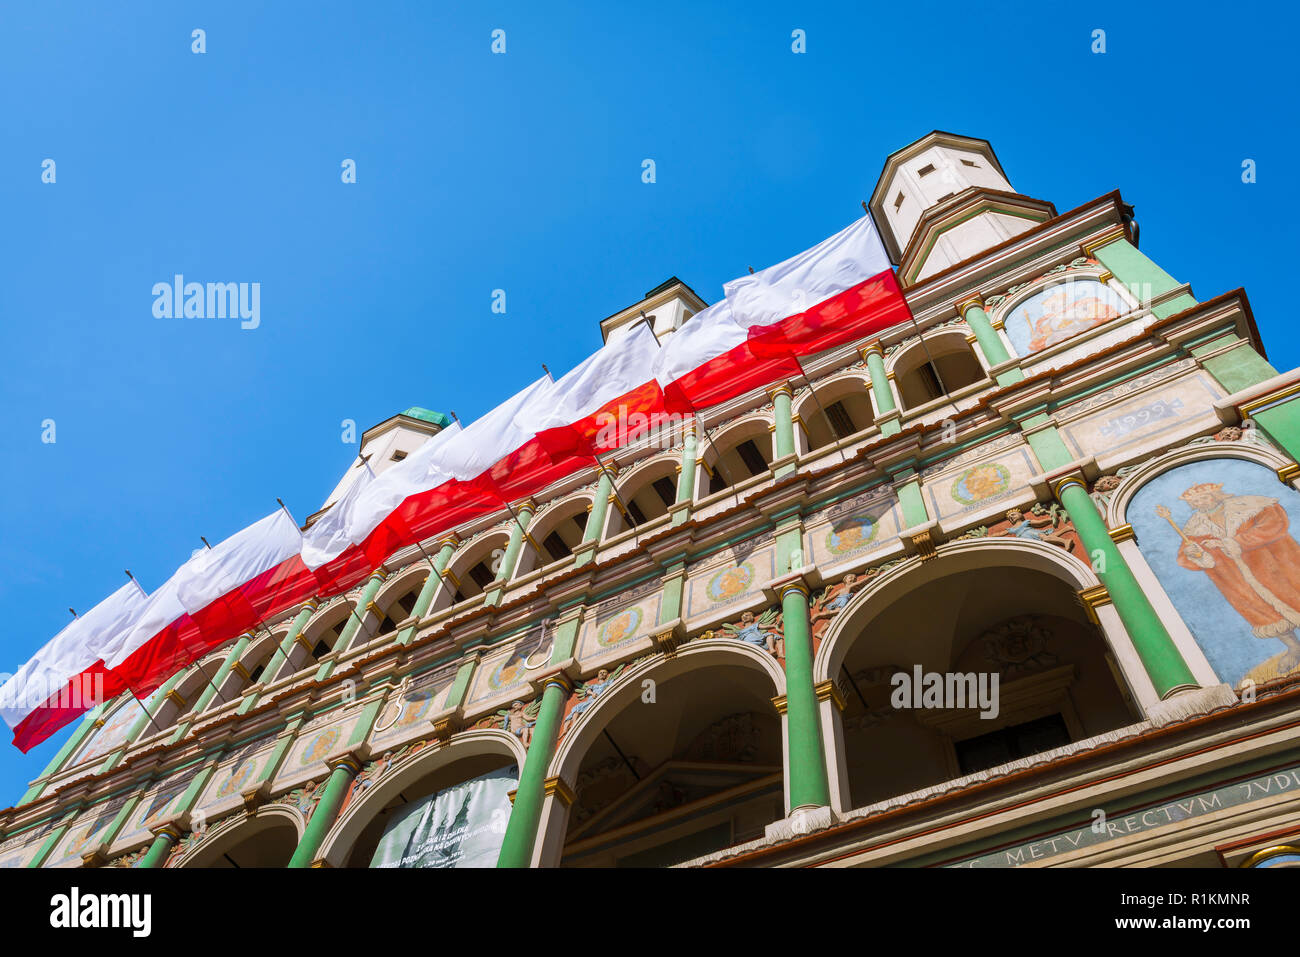 Poznan Town Hall, view of the upper exterior of the Renaissance Town Hall building (Ratusz) in Market Square in the Old Town area of Poznan, Poland. Stock Photo